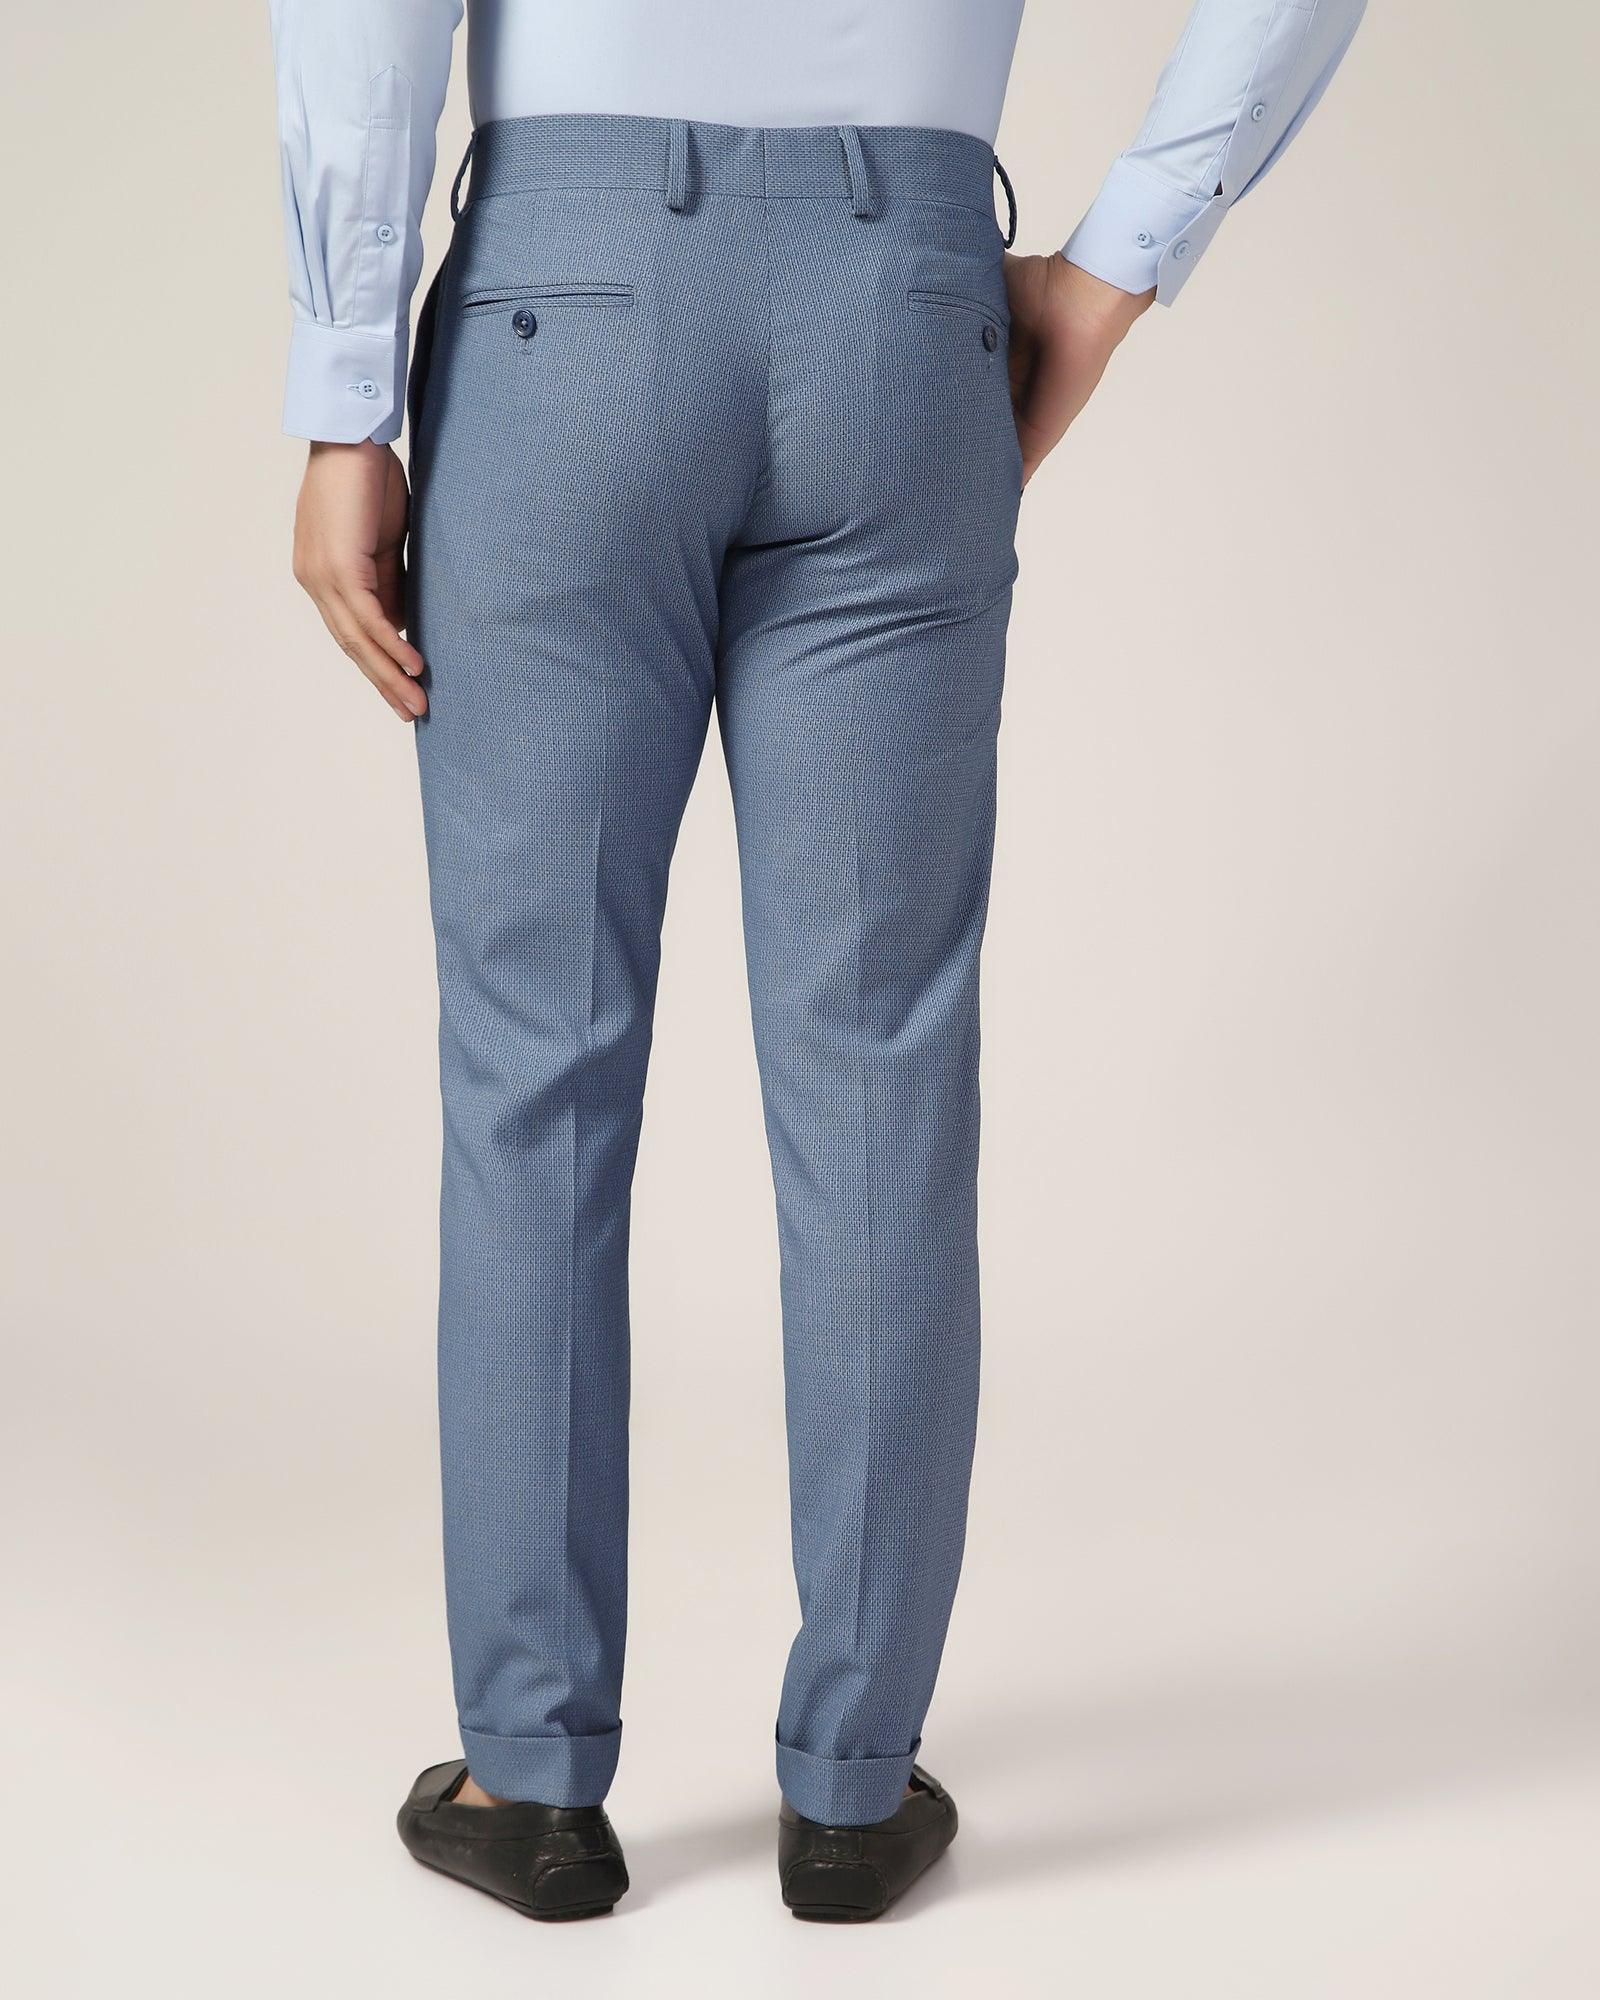 Phoenix Pleated Formal Blue Textured Trouser - Trident